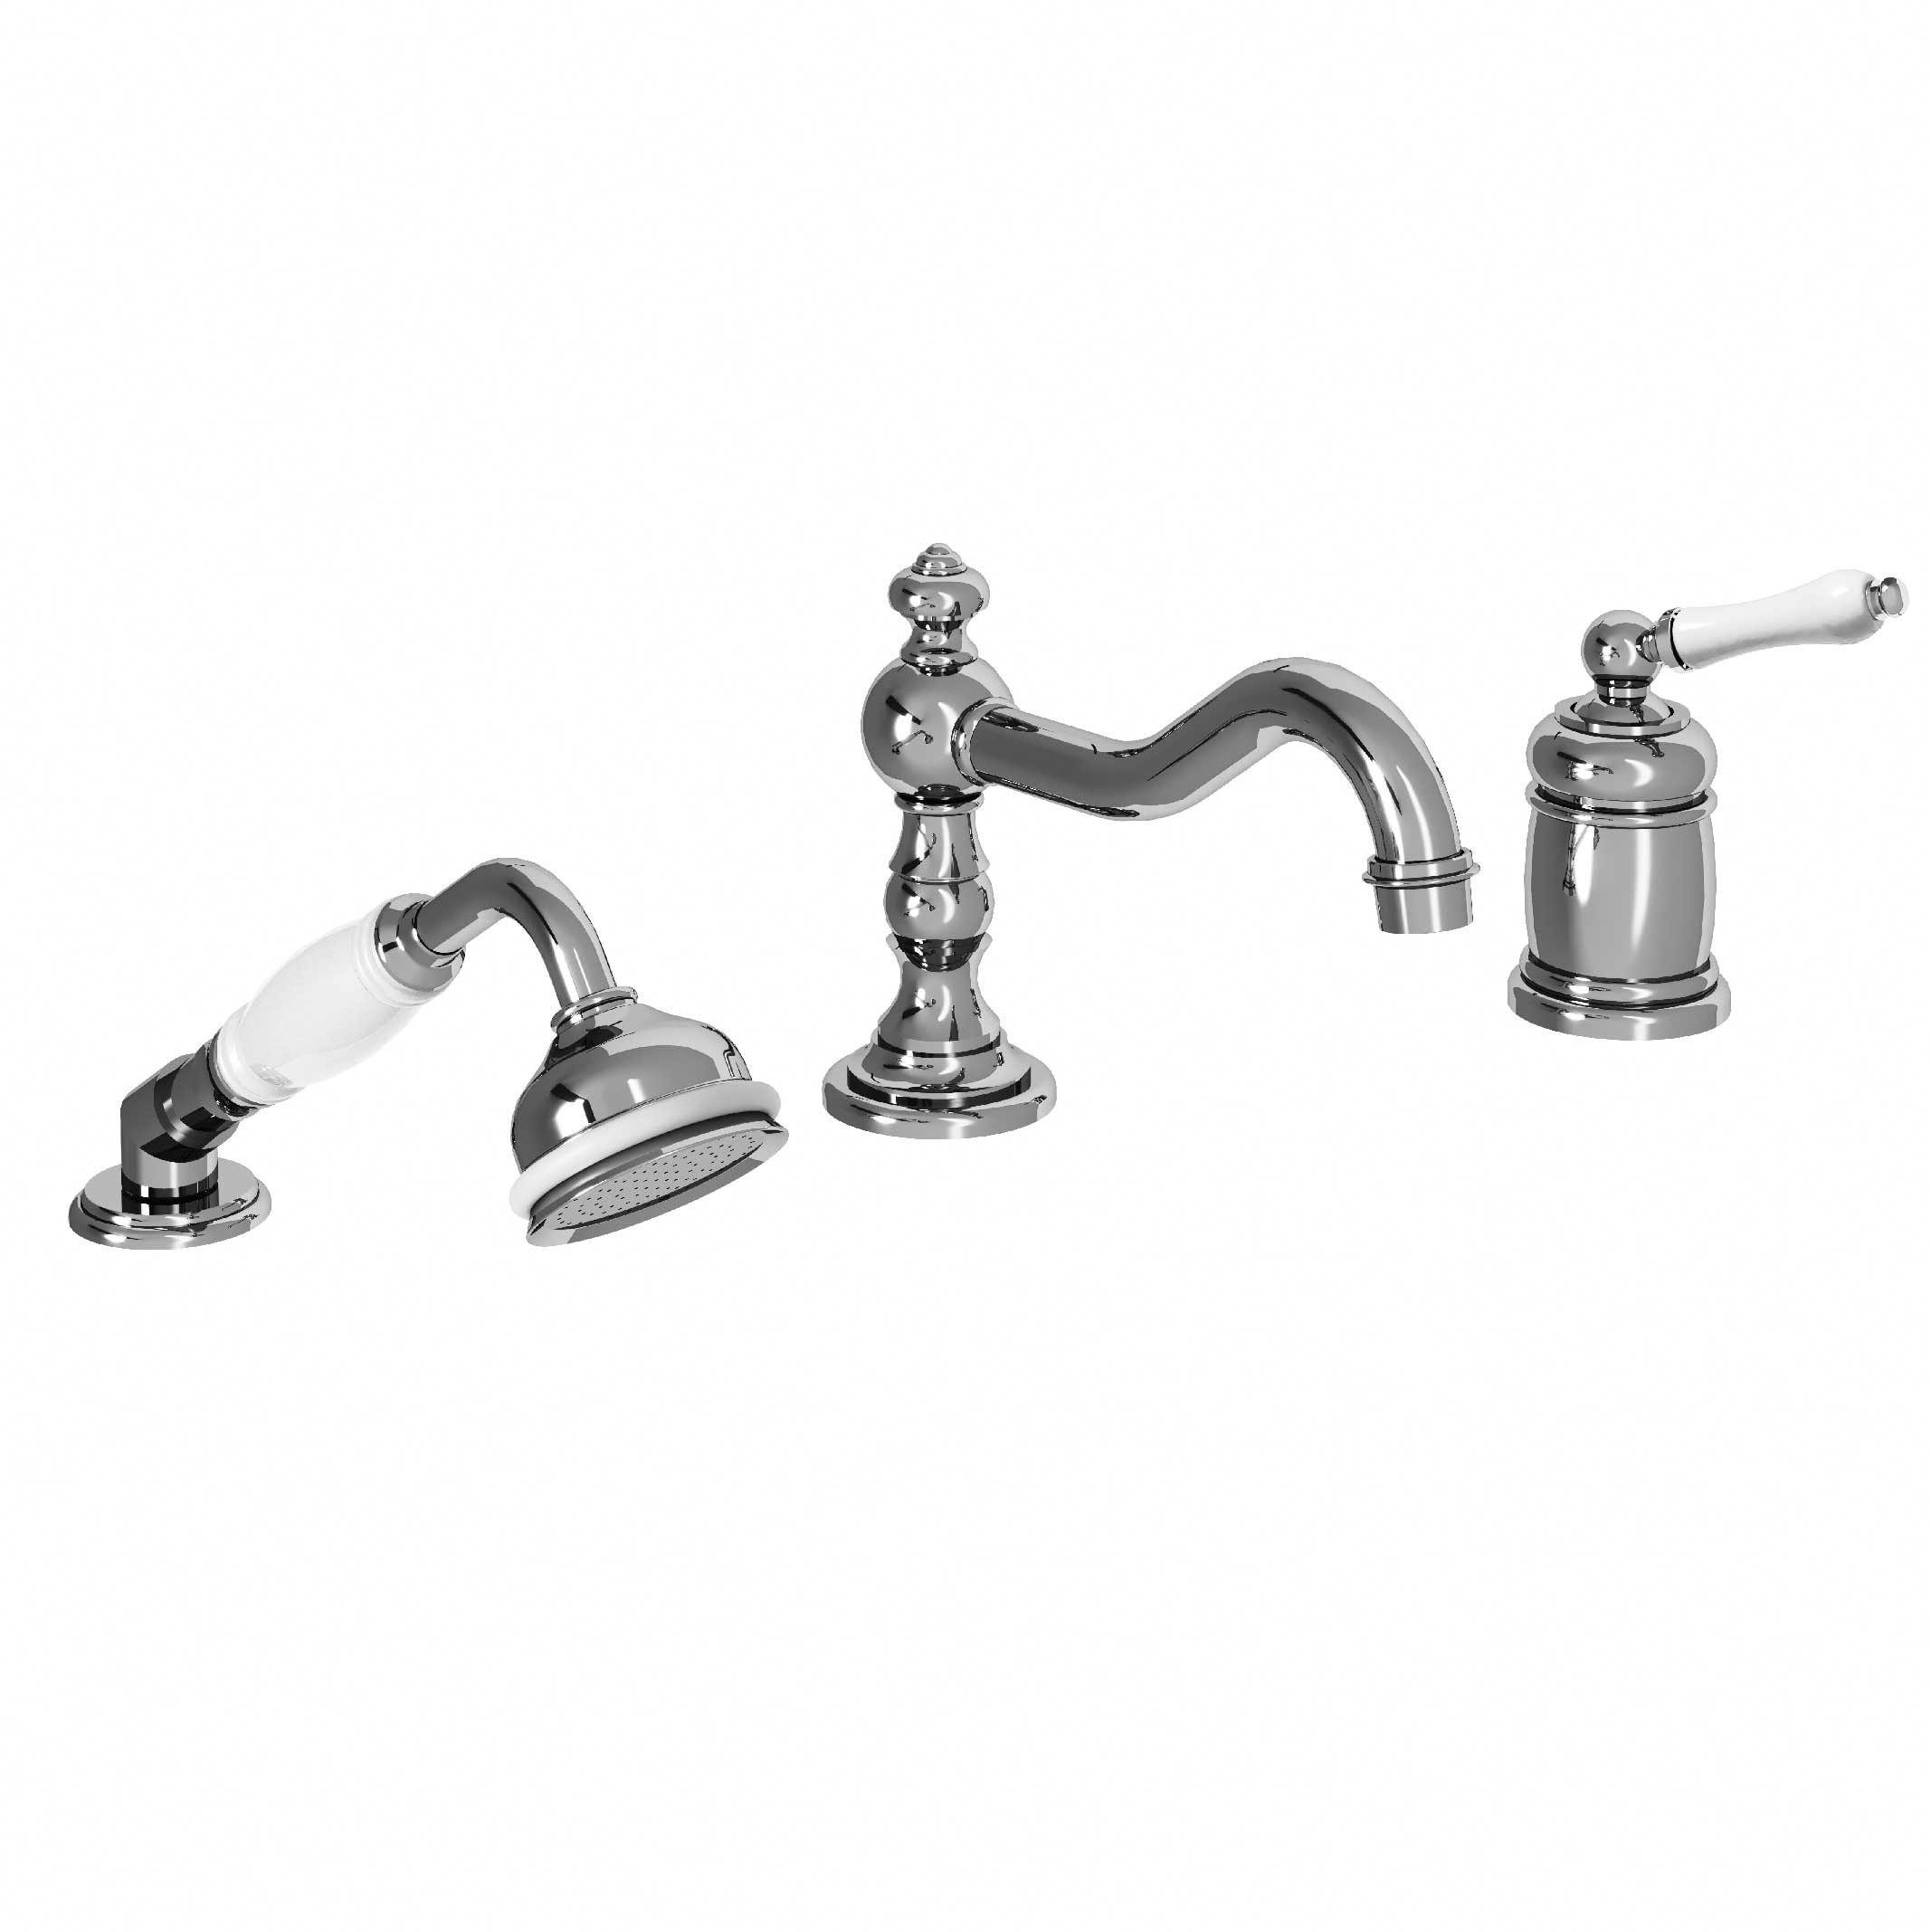 M04-3301M 3-hole single-lever bath and shower mixer